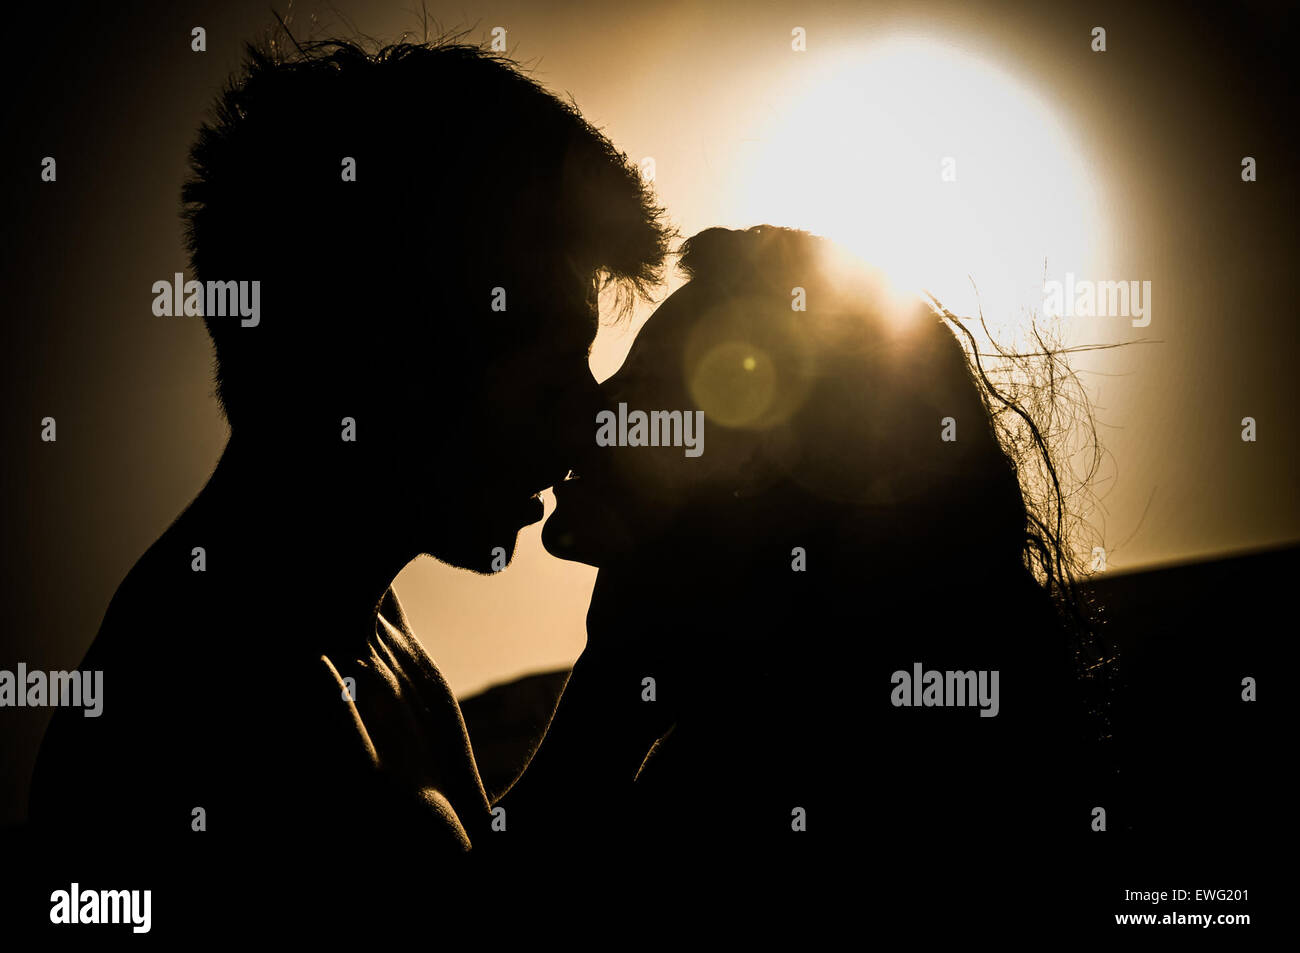 a couple kissing against a moonlit sky black and white Stock Photo